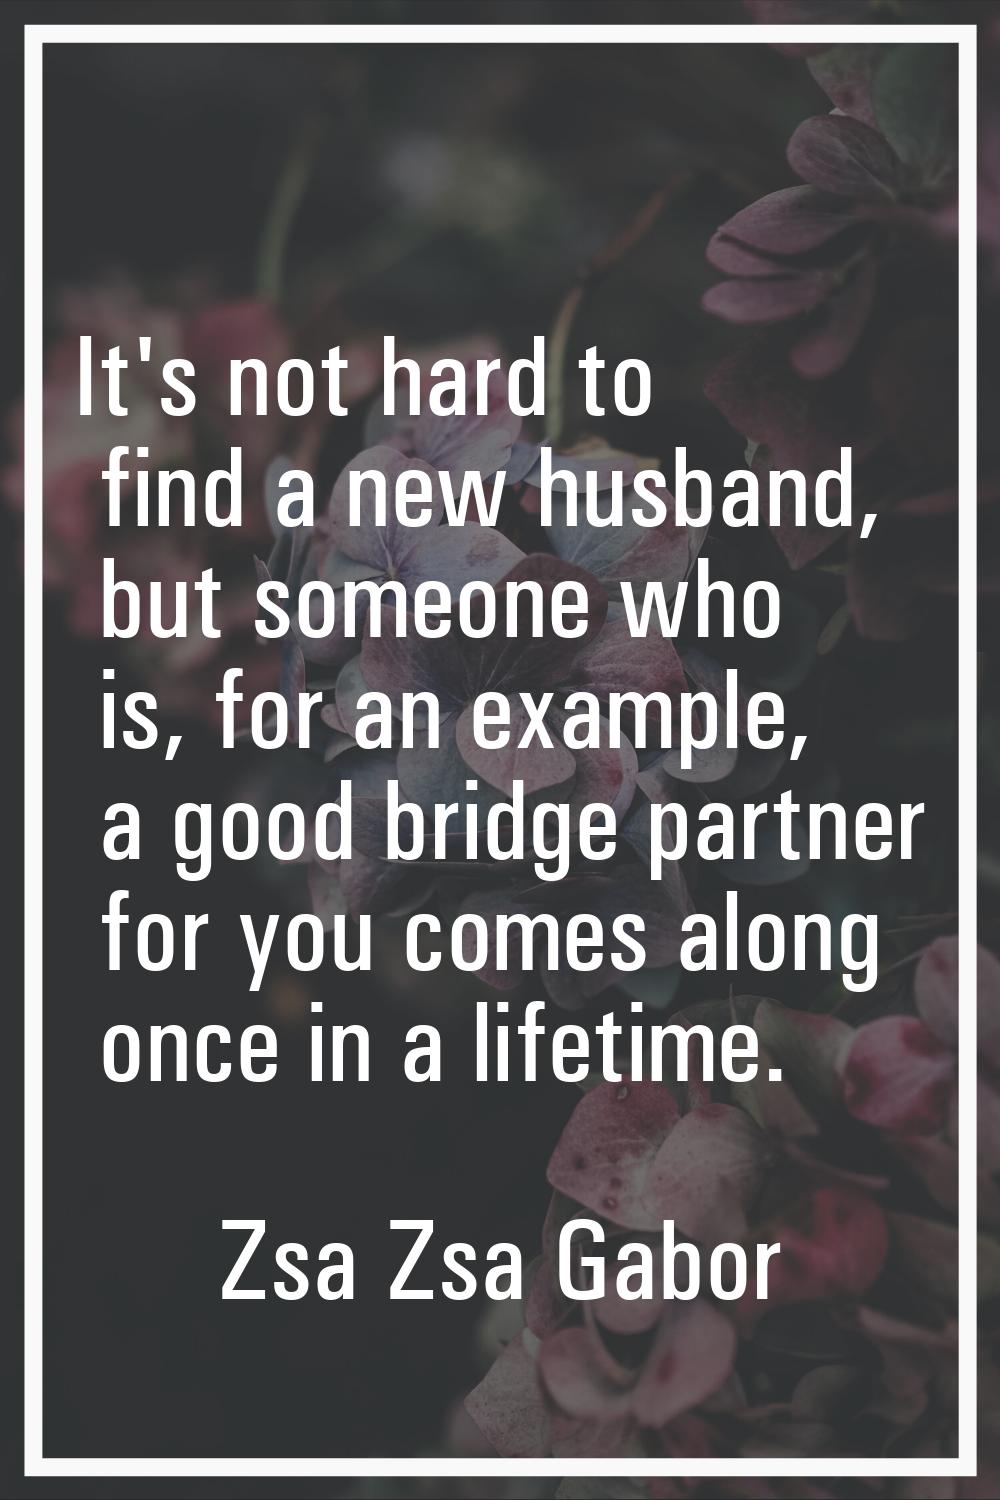 It's not hard to find a new husband, but someone who is, for an example, a good bridge partner for 